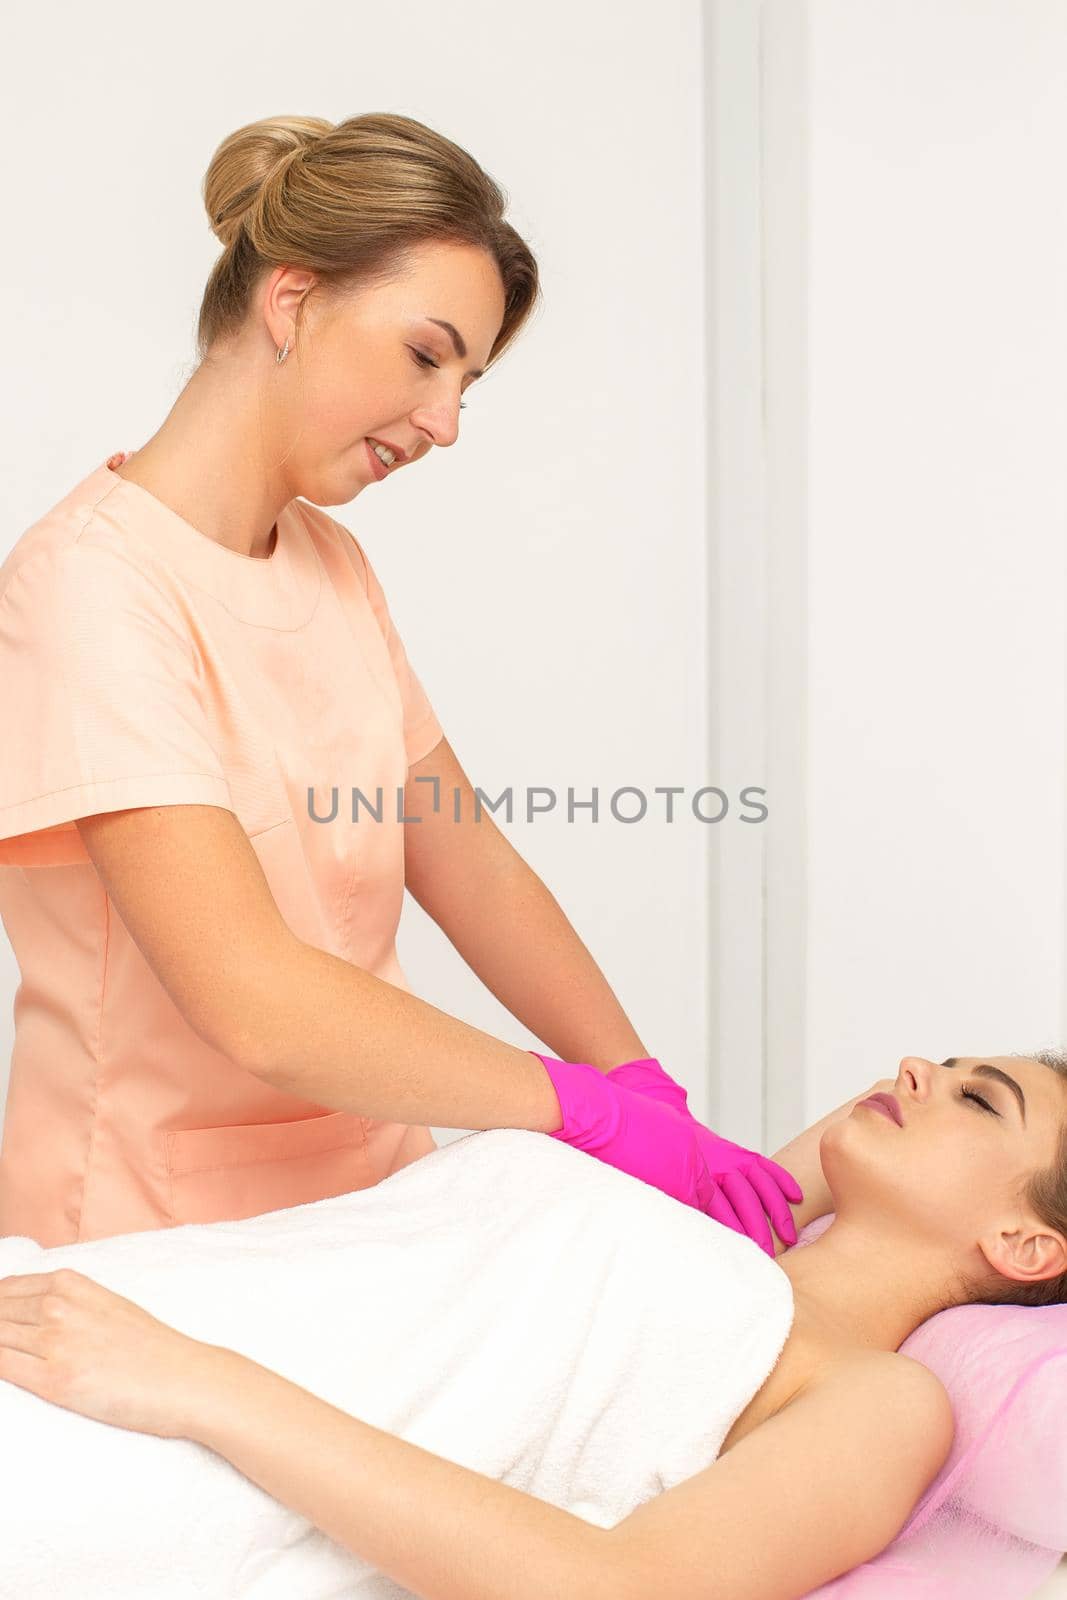 Beautician with a patient during sugaring. The cosmetologist waxes the female armpit